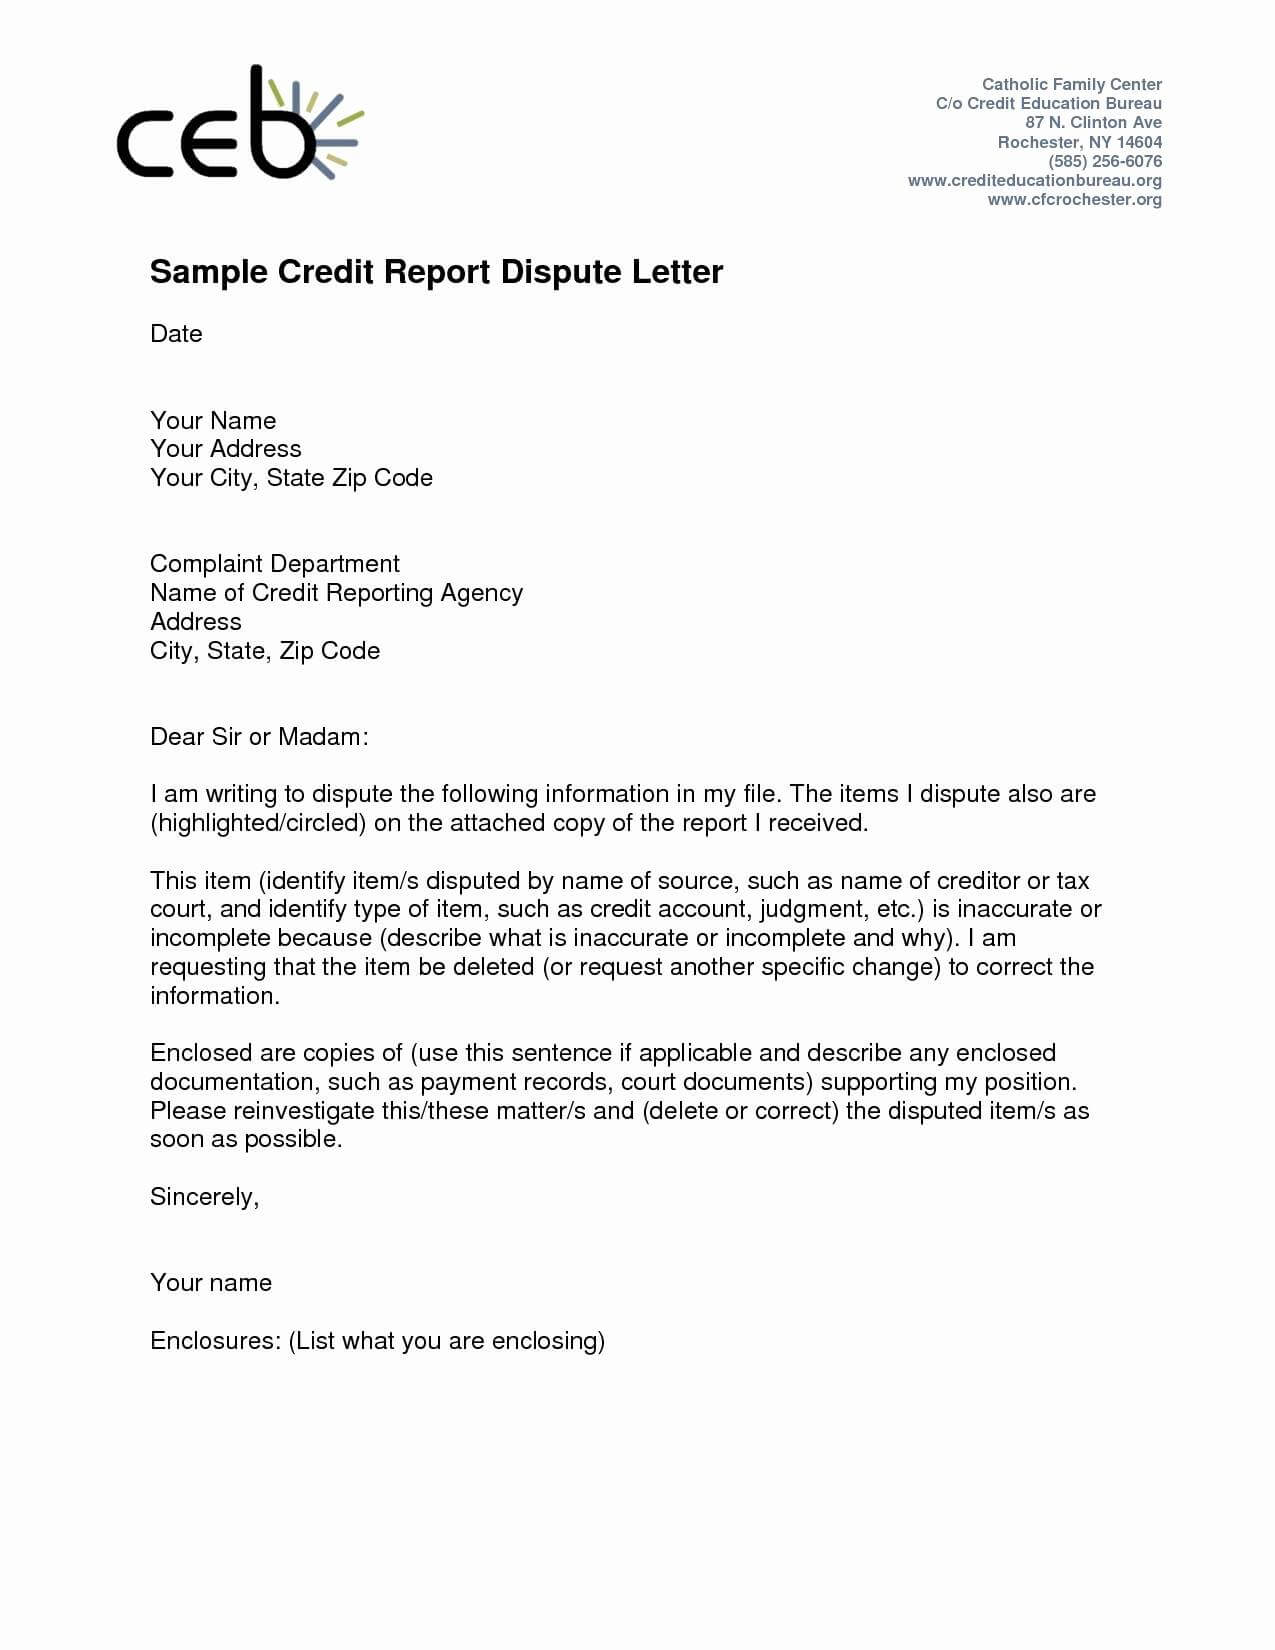 Credit Dispute Templates - Zohre.horizonconsulting.co With Credit Report Dispute Letter Template